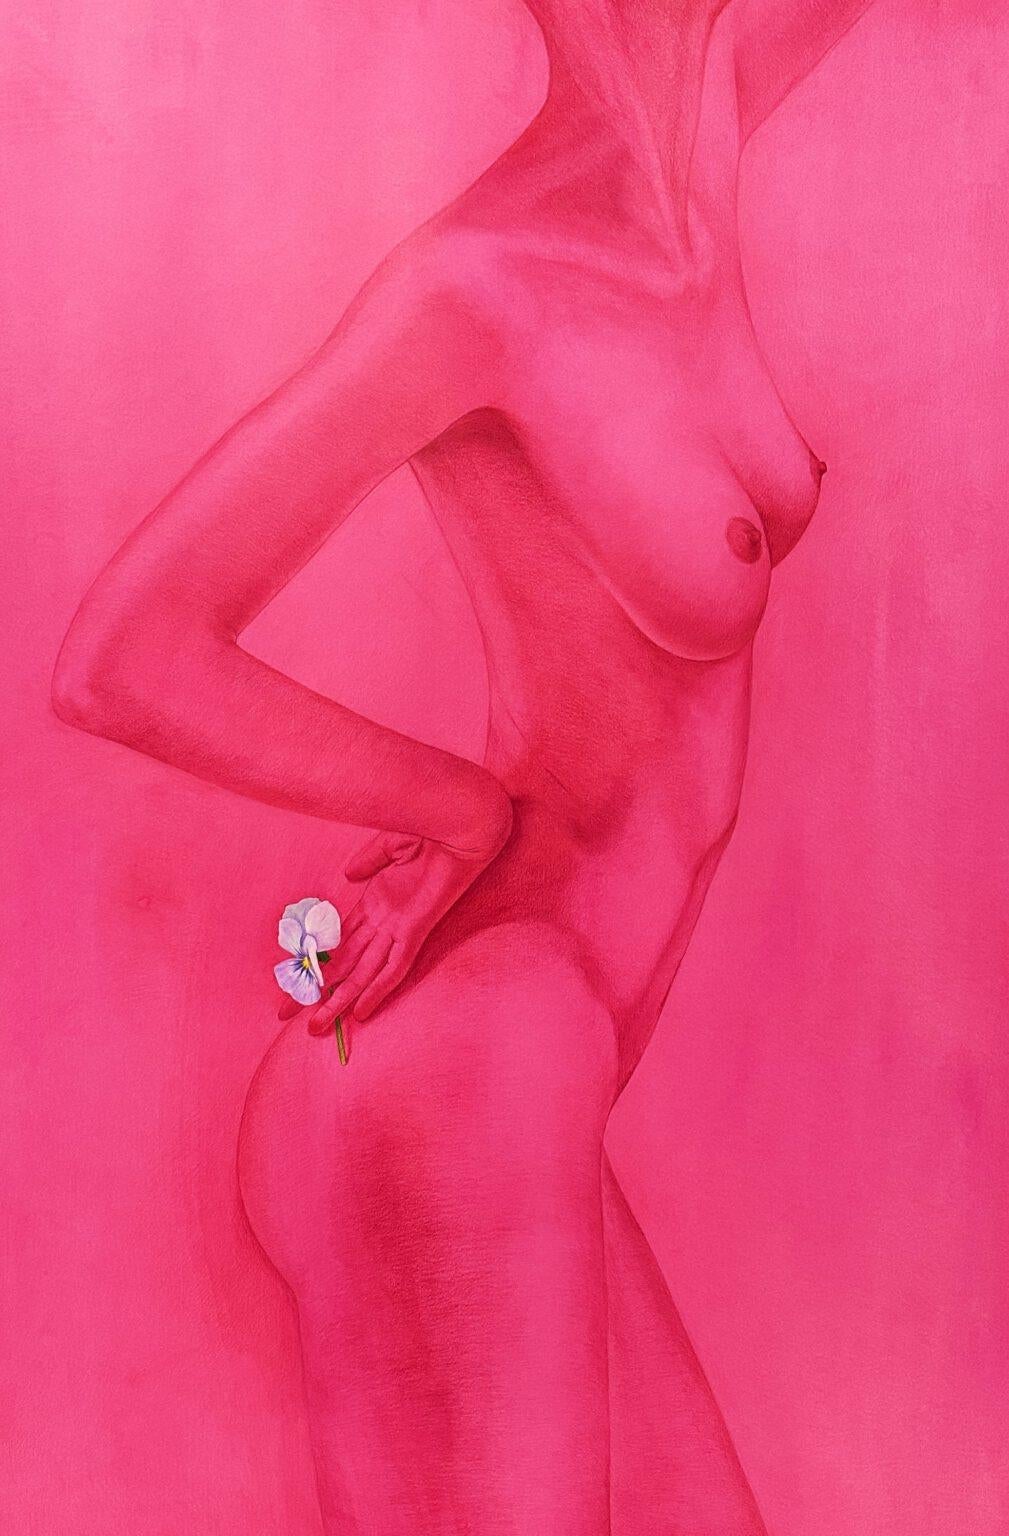 positive sexual objectification, pencil, watercolor, paper, 90х60cm - Painting by Elena Brauschenberg